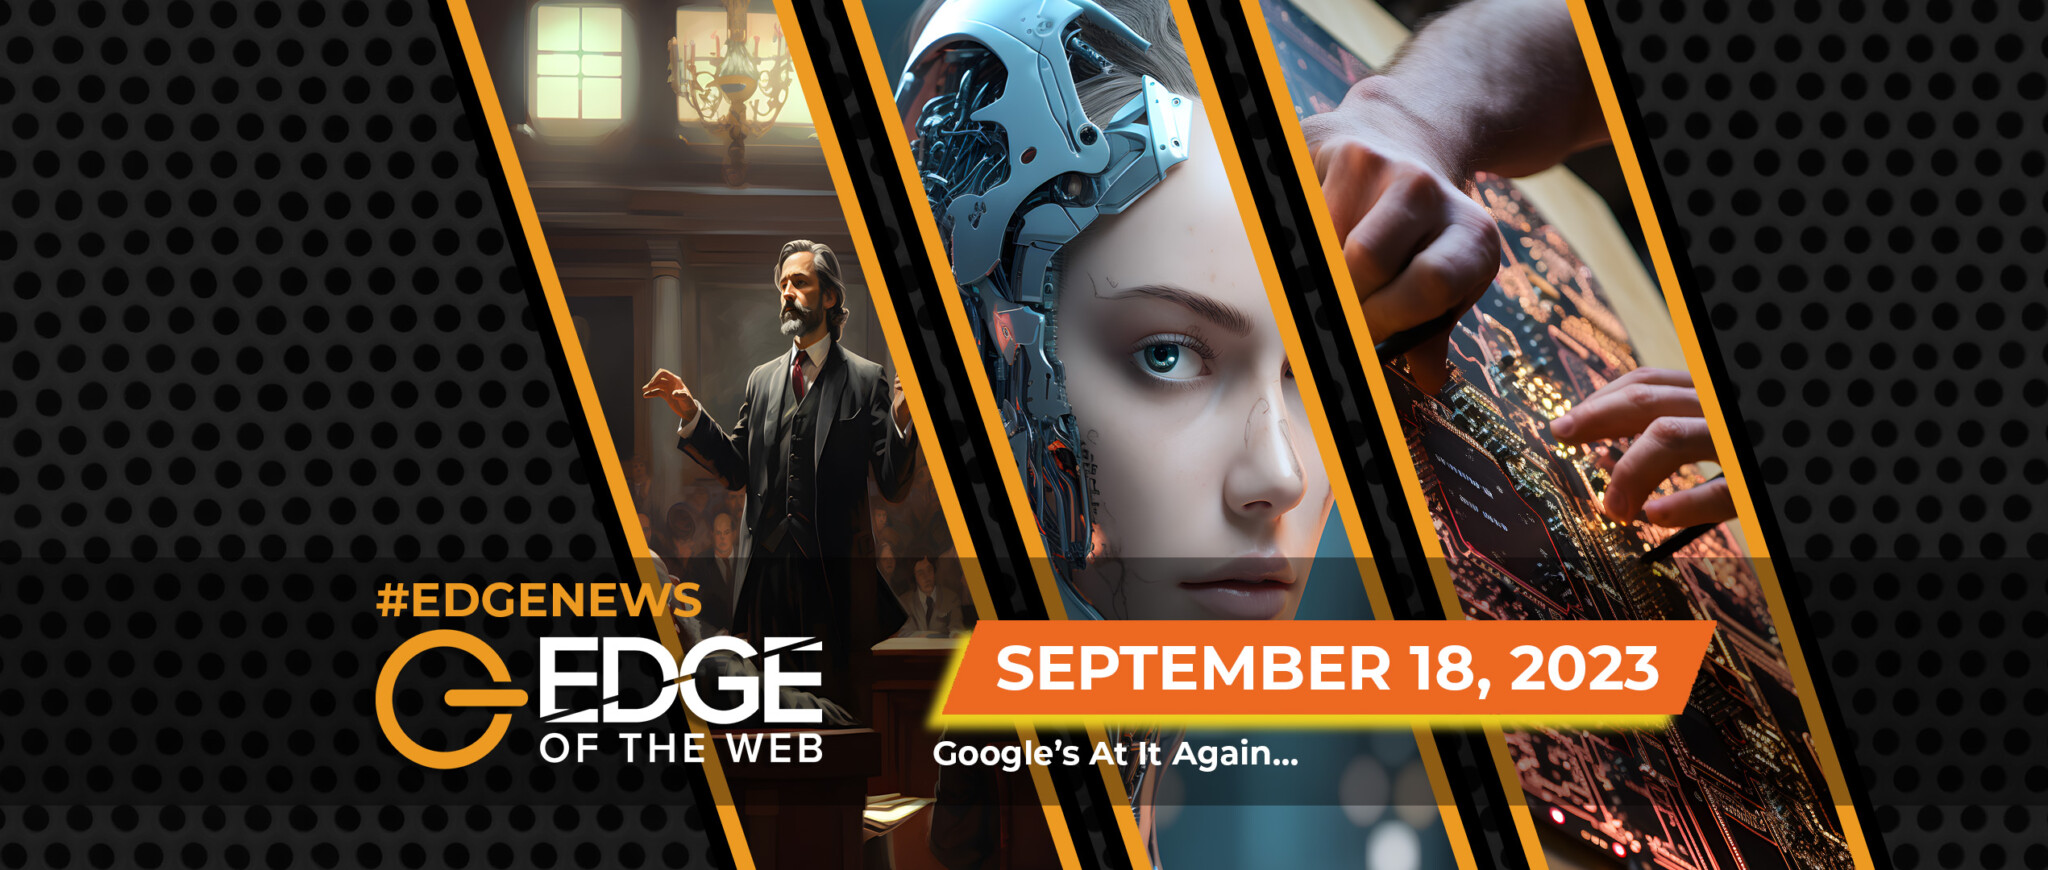 626 | News from the EDGE | Week of 9.18.2023